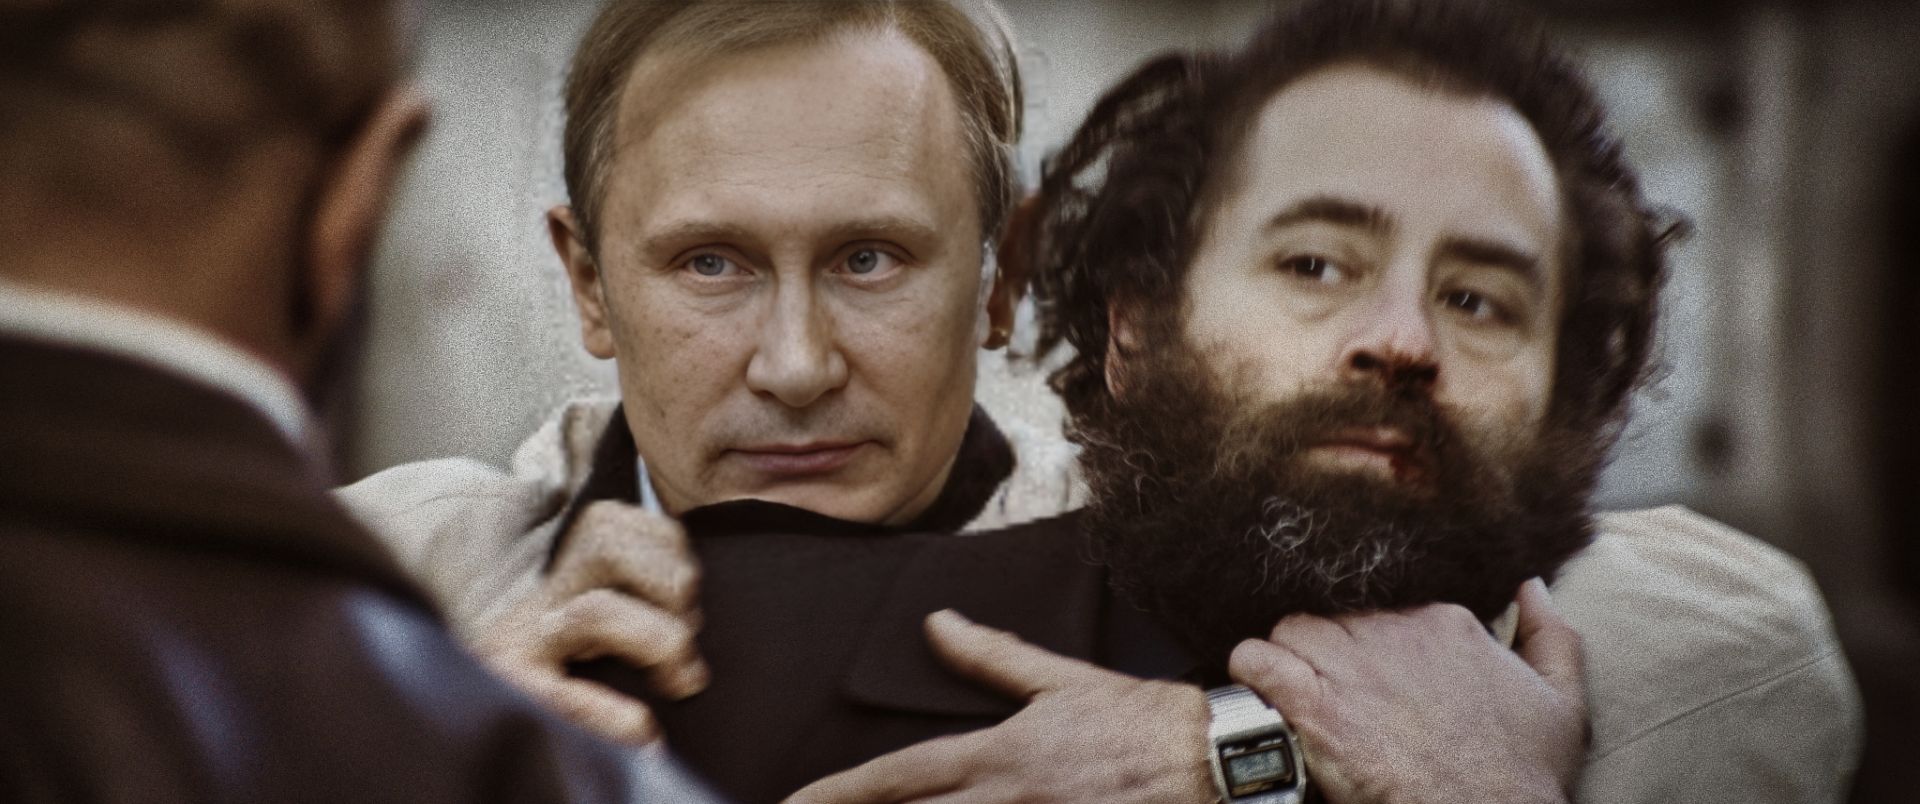 AIO Studios announce premiere of AI-driven biopic, 'Putin,' directed by Patryk Vega. AIO Studios - Images from an AI-generated production